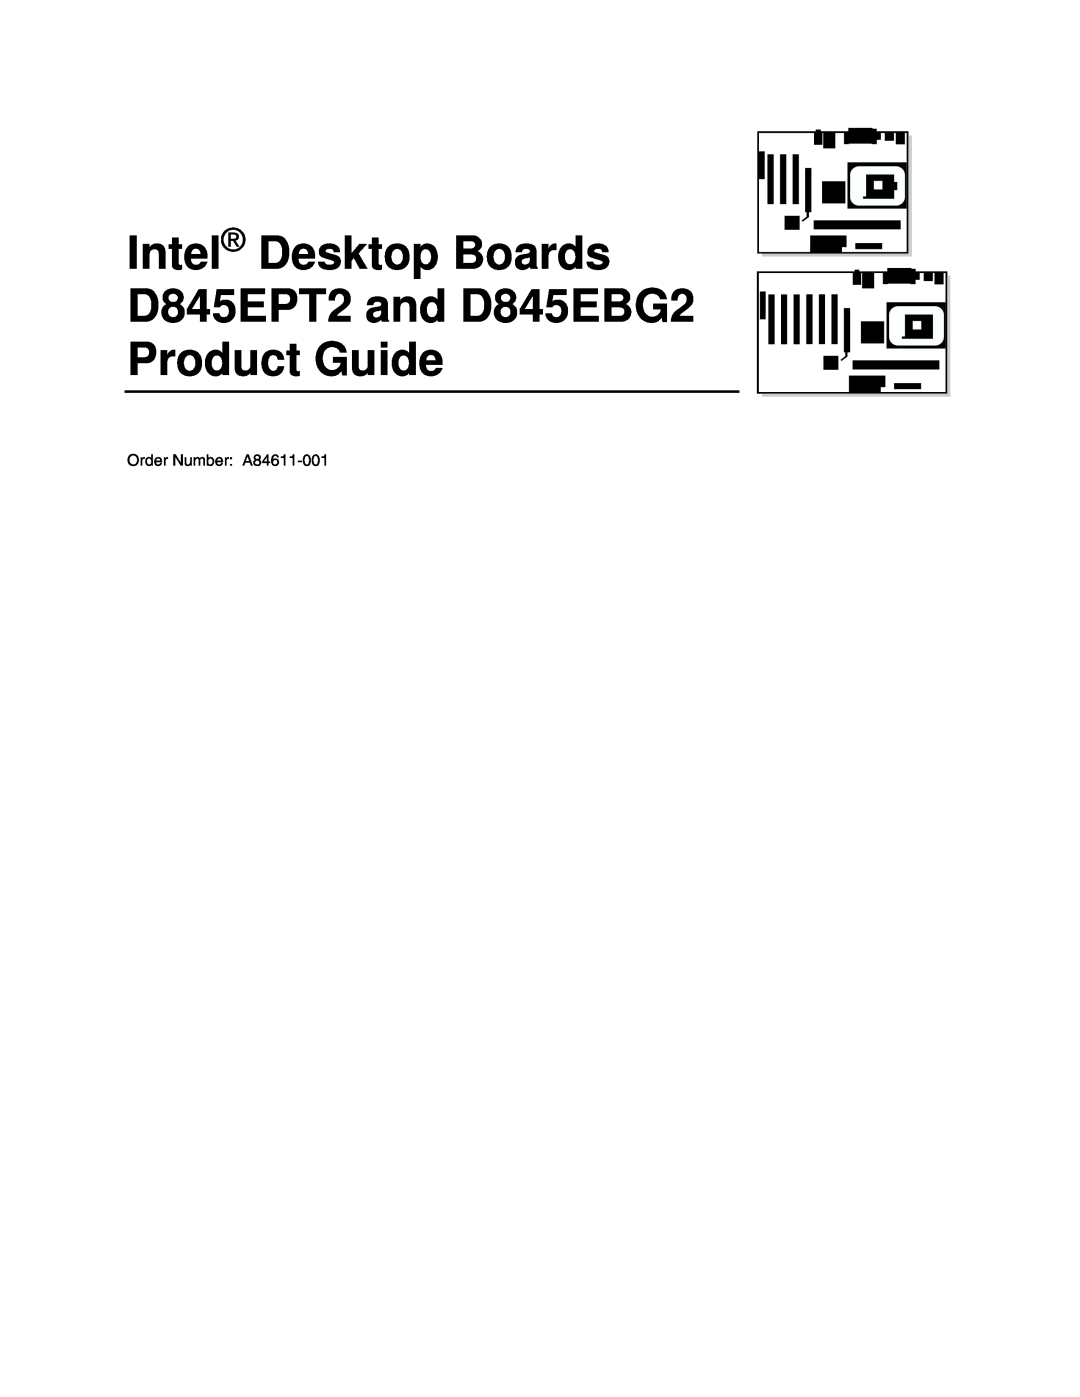 Intel manual Intel Desktop Boards D845EPT2 and D845EBG2 Product Guide, Order Number A84611-001 